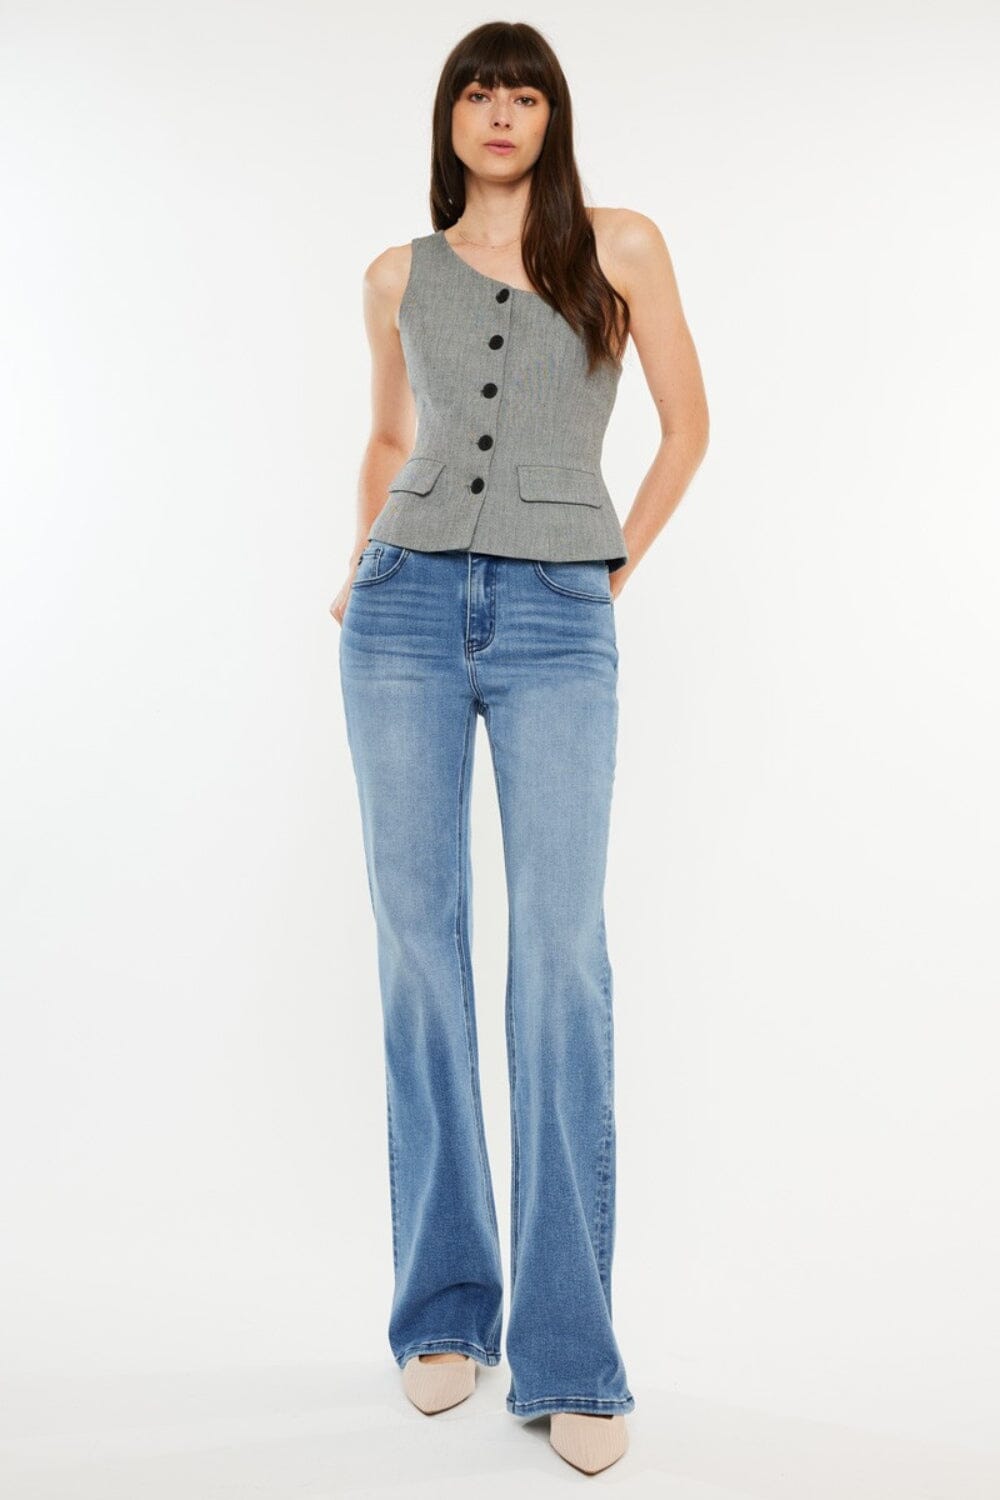 Kancan Medium Blue Ultra High Rise Cat's Whiskers Jeans jeans jehouze 